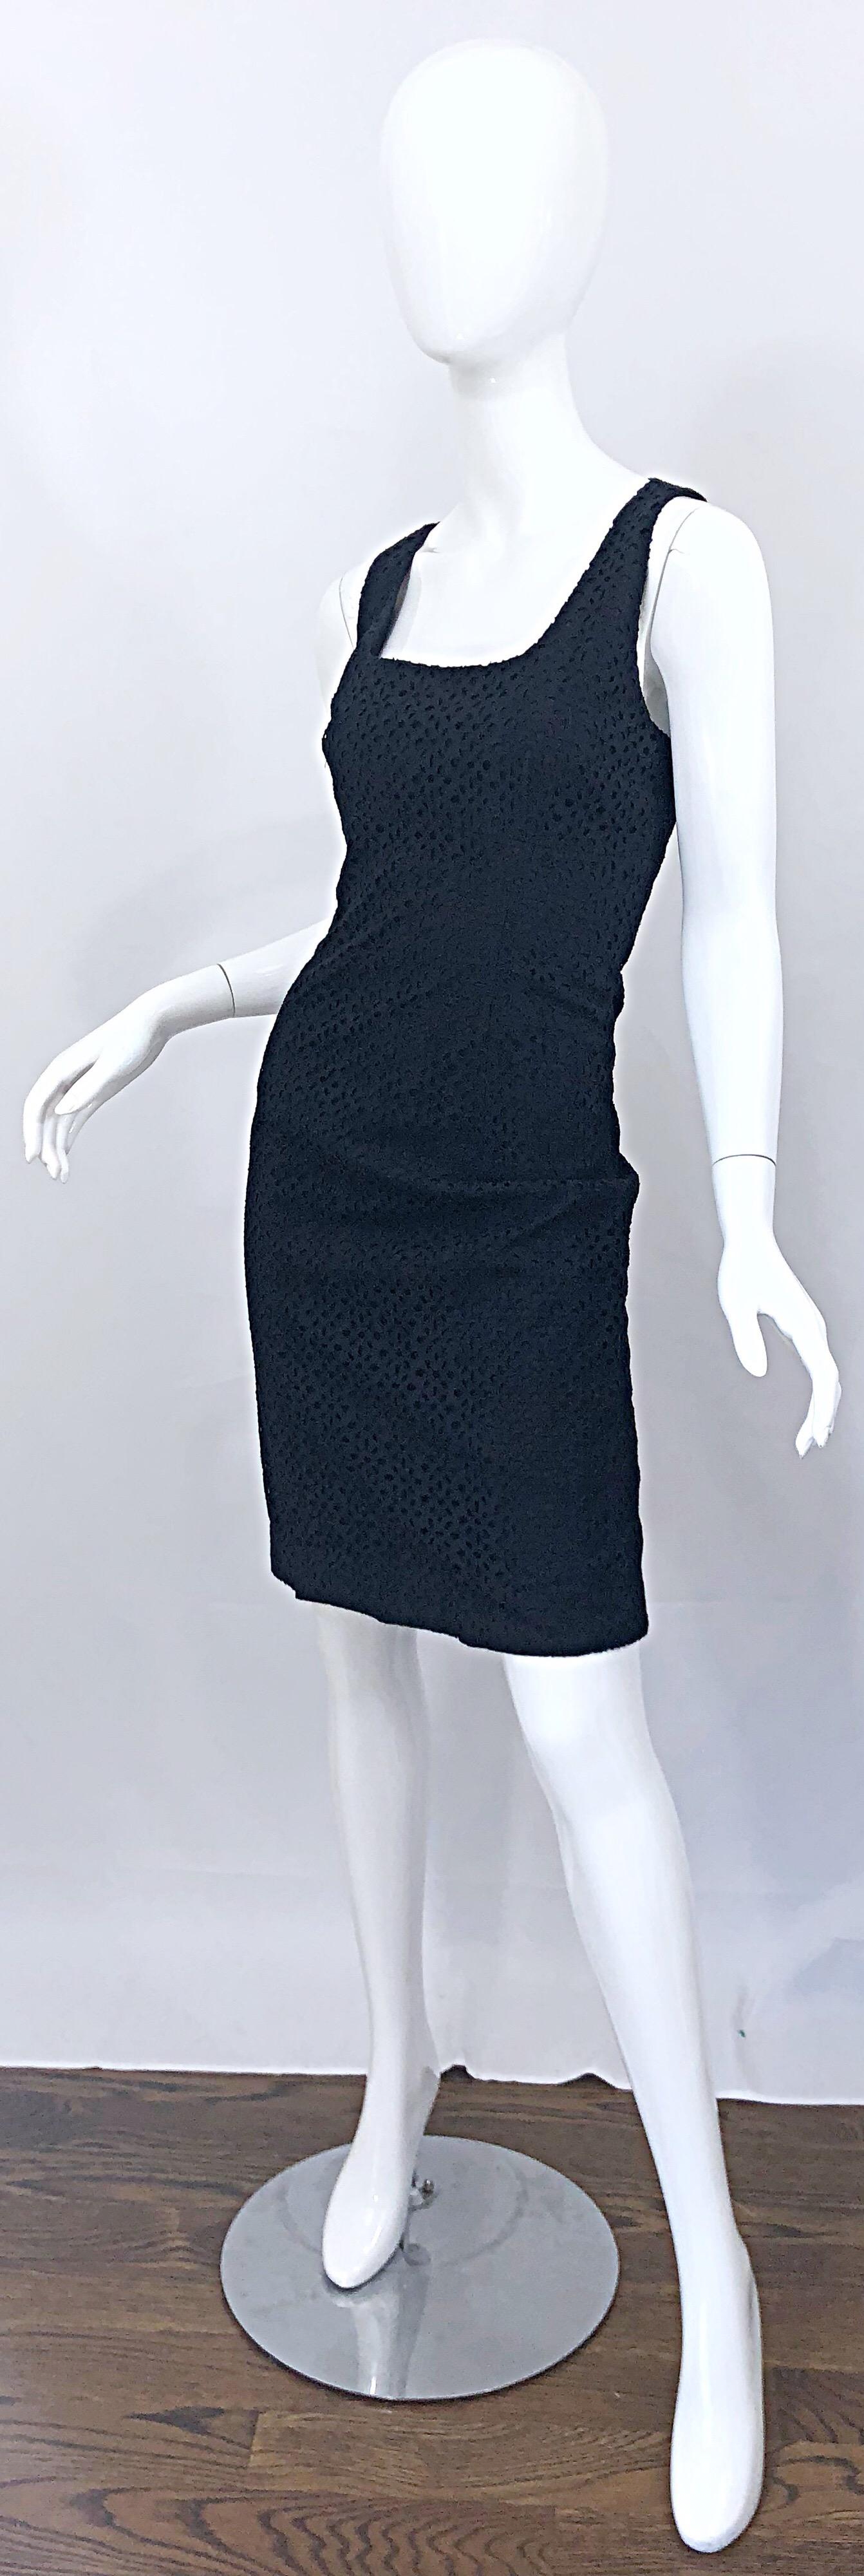 New Michael Kors Collection Size 10 Cotton Eyelet Little Black Sheath Dress In Excellent Condition For Sale In San Diego, CA